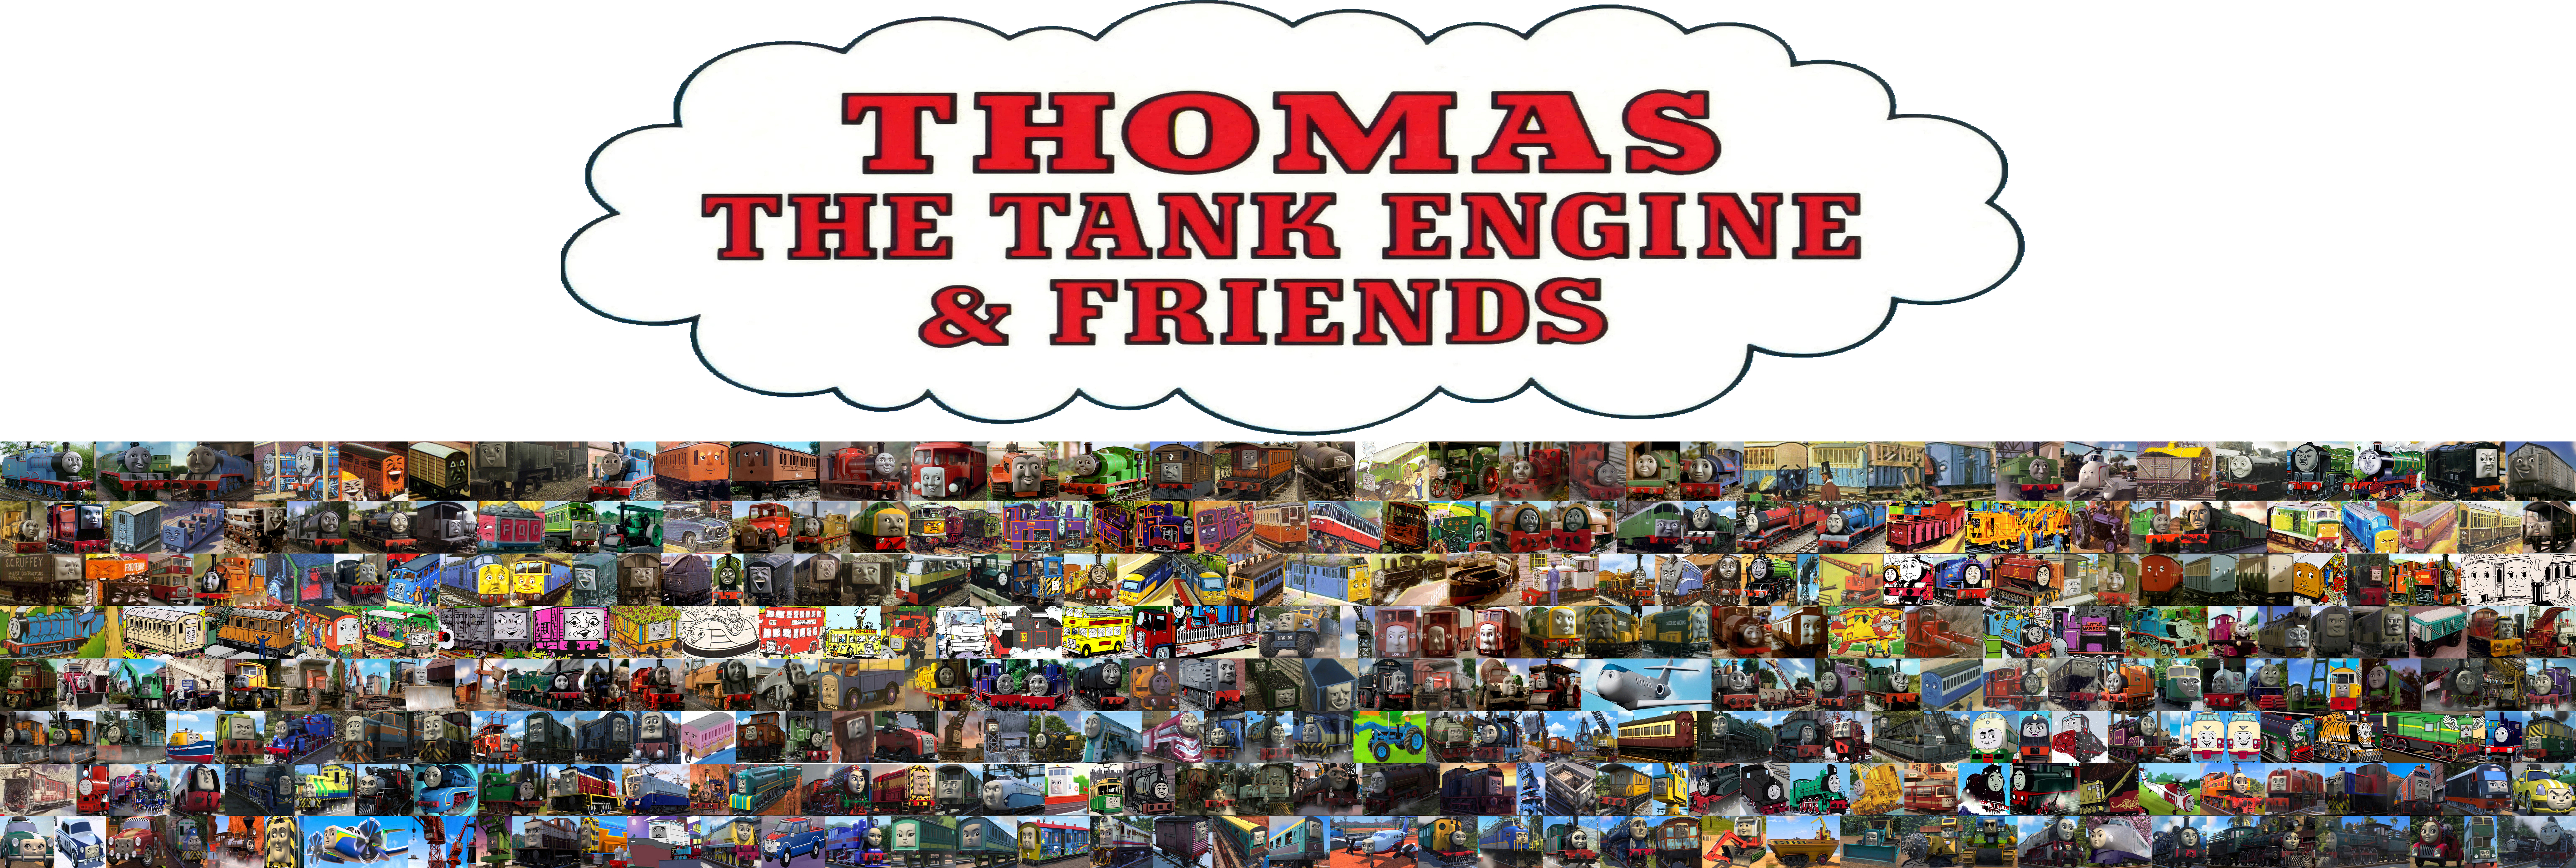 Thomas the Tank Engine & Friends by Diesel292